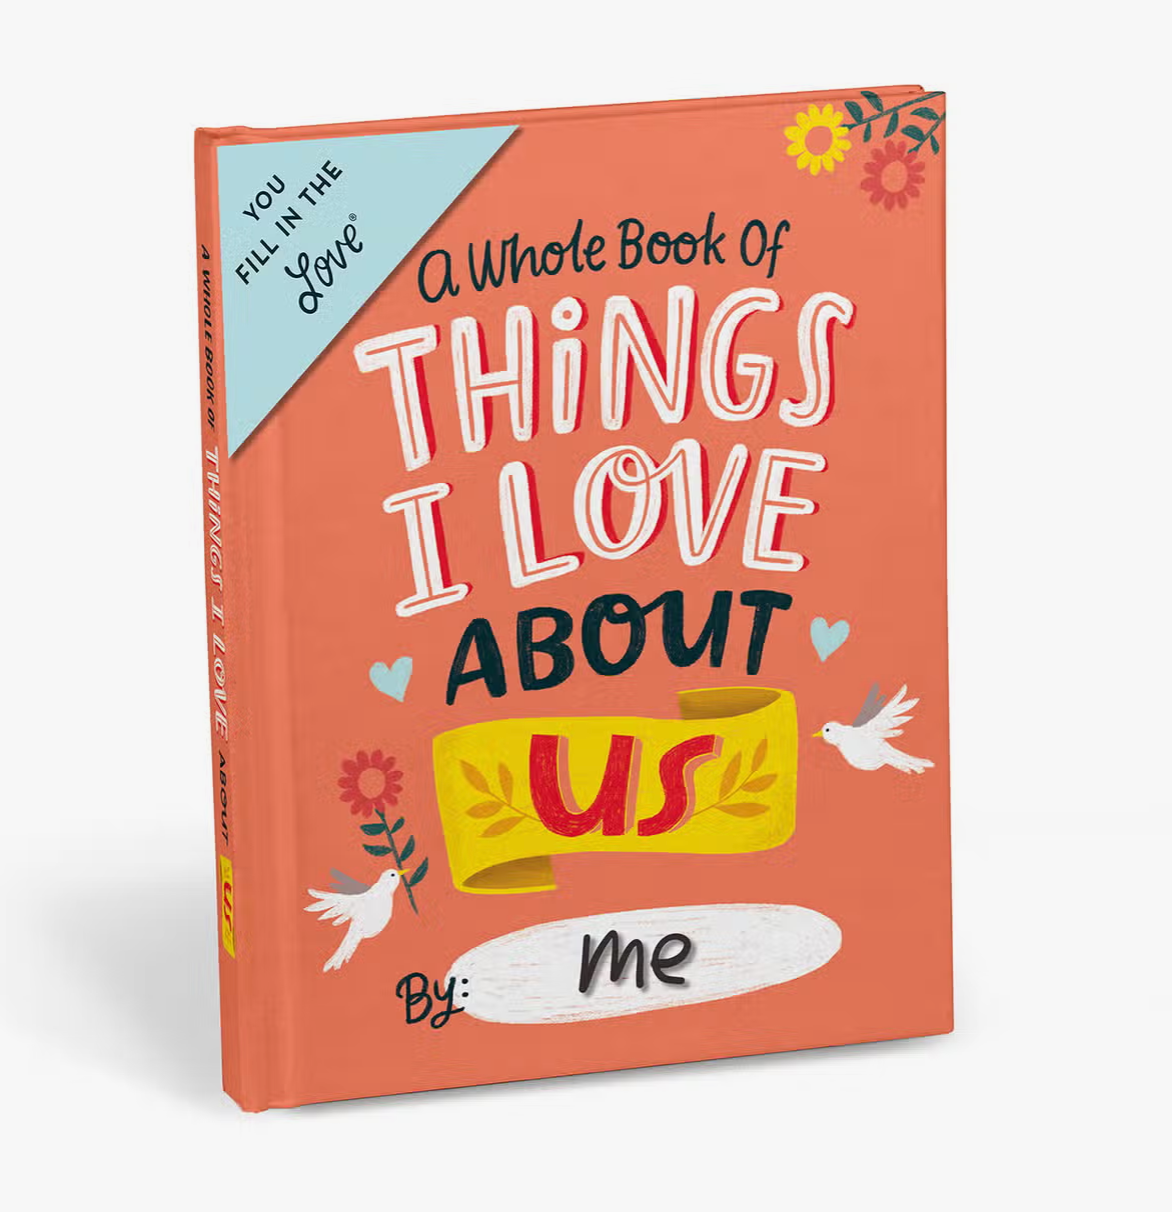 About Us Fill in the Love Journal